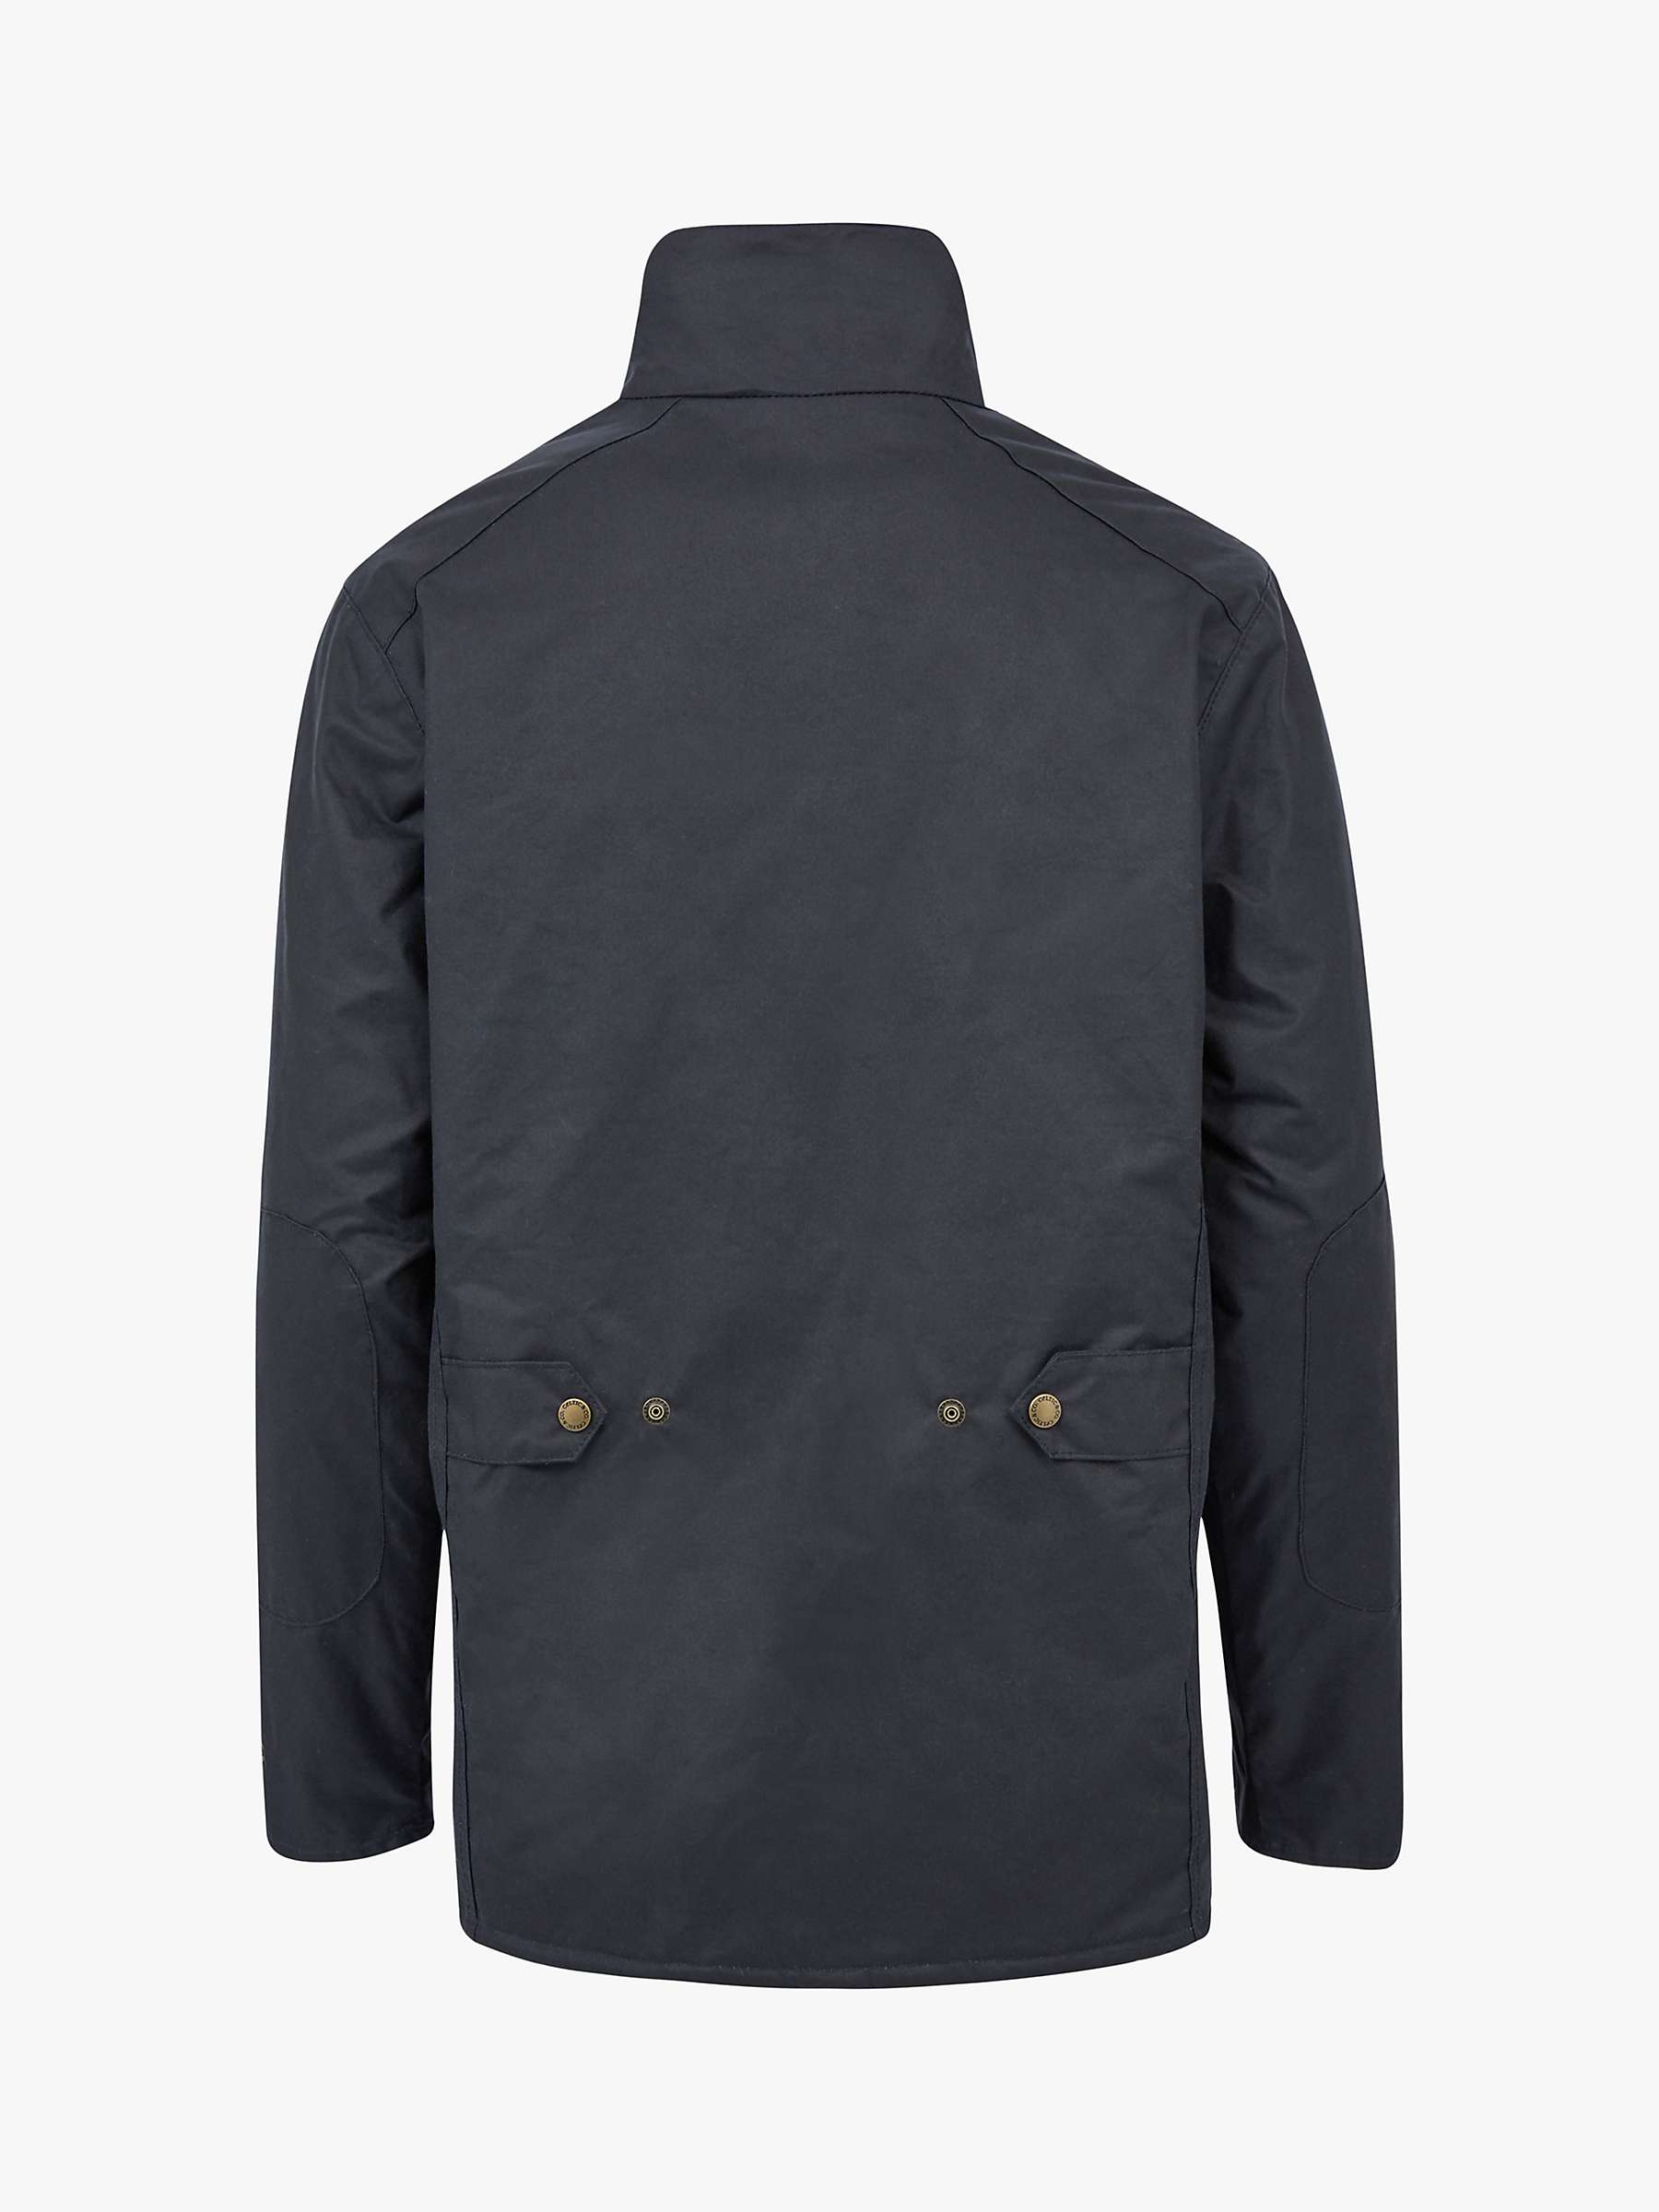 Buy Celtic & Co. Waxed Cotton Jacket, Dark Navy Online at johnlewis.com